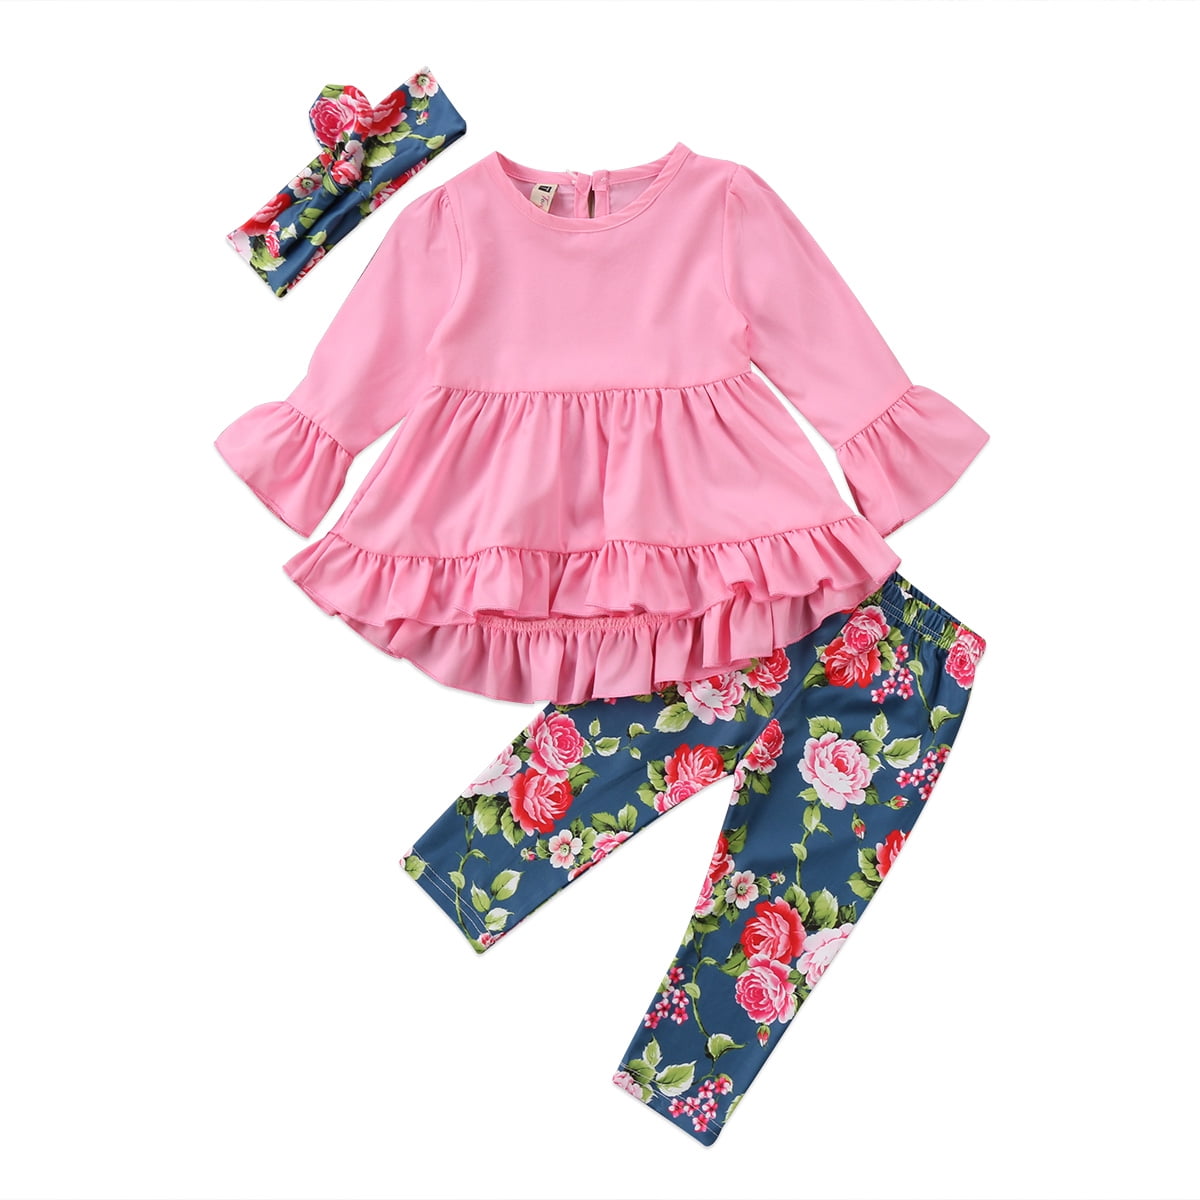 Bebiullo Toddler Kids Baby Girls Flower Ruffles Top Blouse Pants Leggings  Outfits Set Autumn Spring Clothes 3-4 Years 